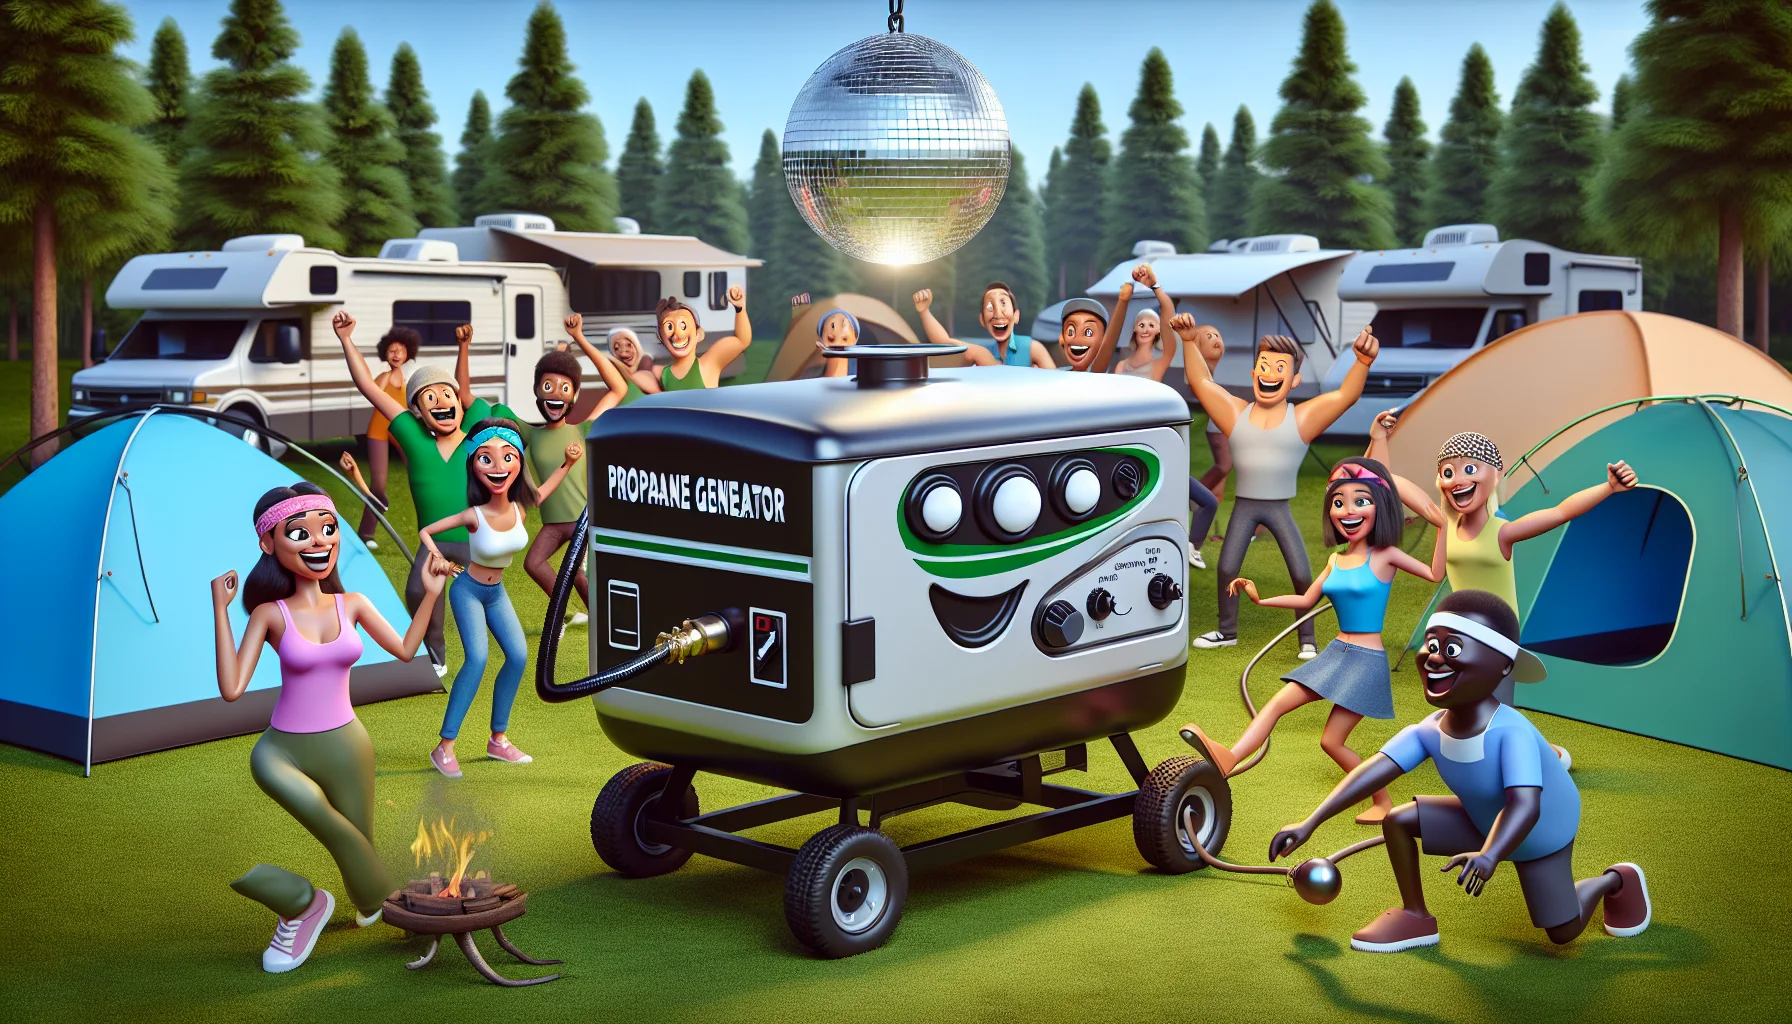 Visualize a humorous scenario featuring an RV propane generator. Have the design of the propane generator be anthropomorphized, with fun cartoonish traits like expressive eyes and arms, working enthusiastically to create electricity. Make it the central figure in an engaging outdoor camping setting, surrounded by a group of amused campers of diverse genders and descents, such as Caucasian, Hispanic, Black, Middle-Eastern, South Asian people equally represented, who are contributing in their own quirky ways to the process. The electricity generated is lighting up unusual things like a disco ball hanging from a tree or a novelty giant light bulb, and you can see the delight on campers' faces, hence suggesting the excitement of generating electricity.